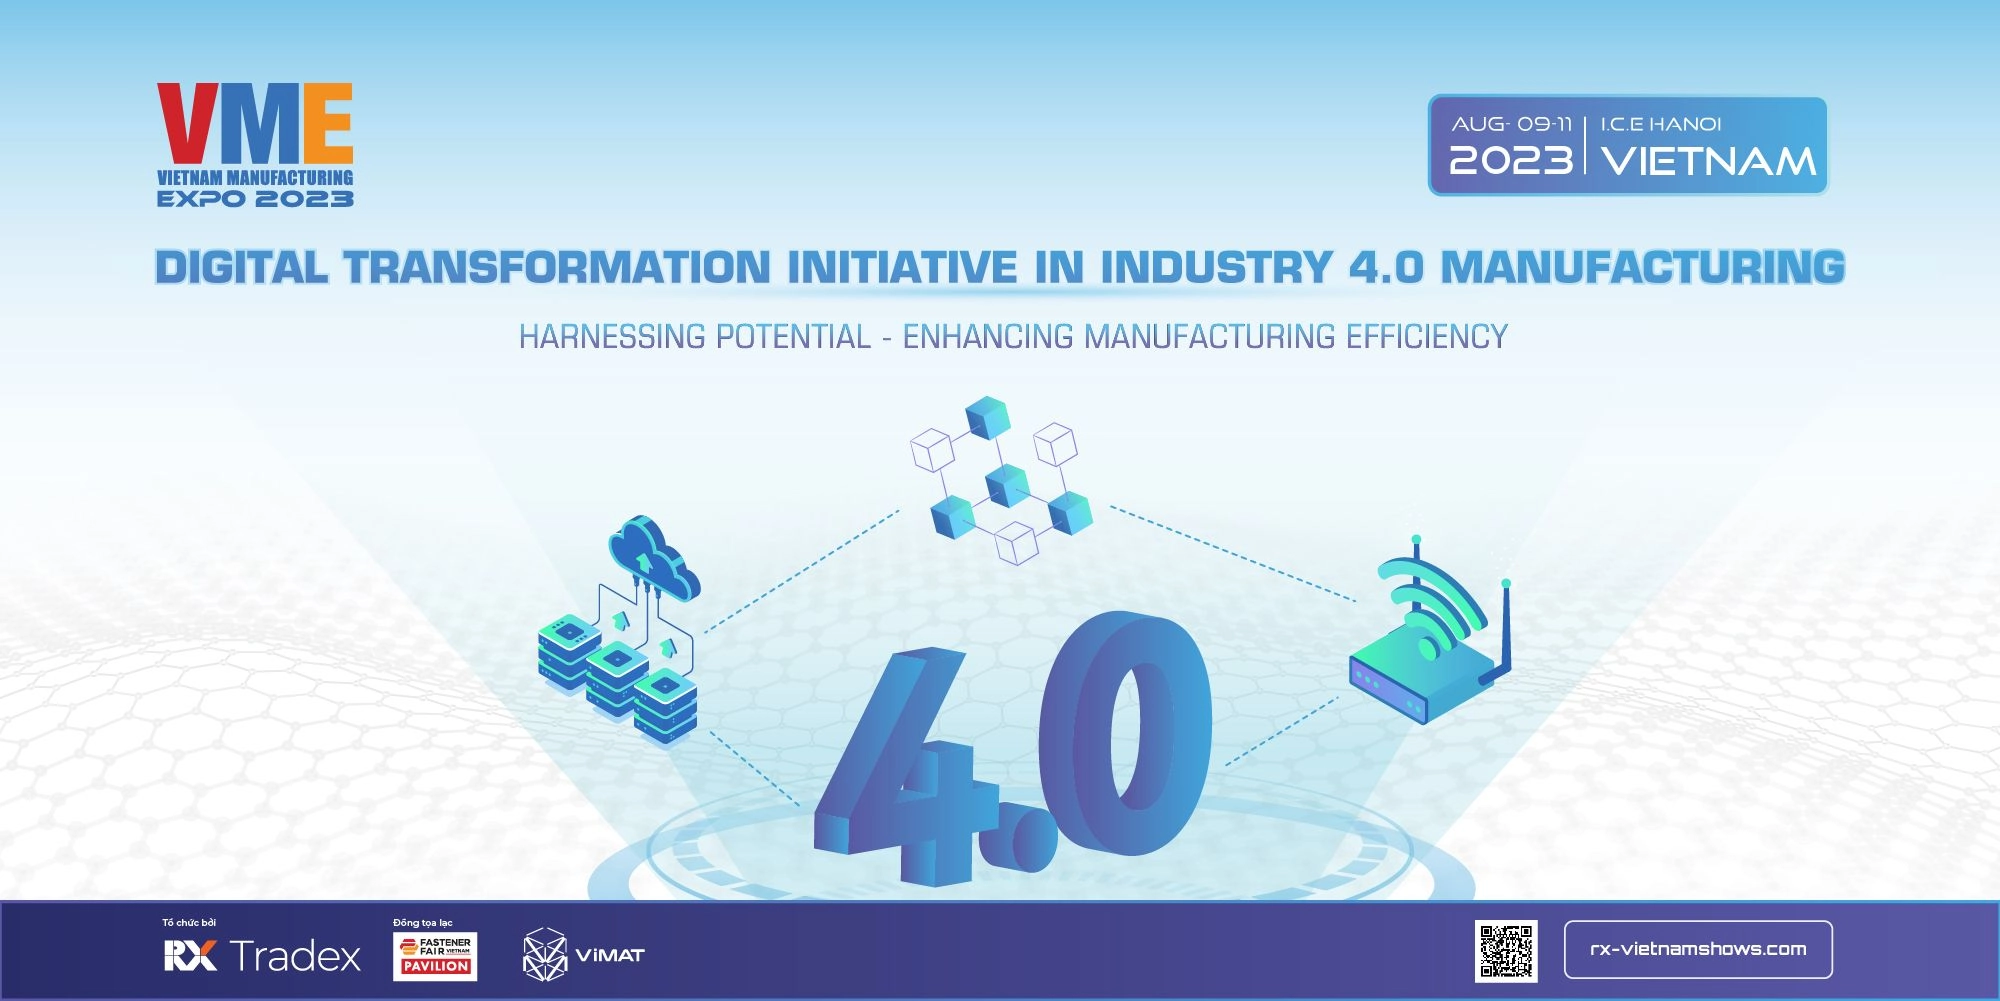 Digital transformation initiatives in the industry 4.0 manufacturing era